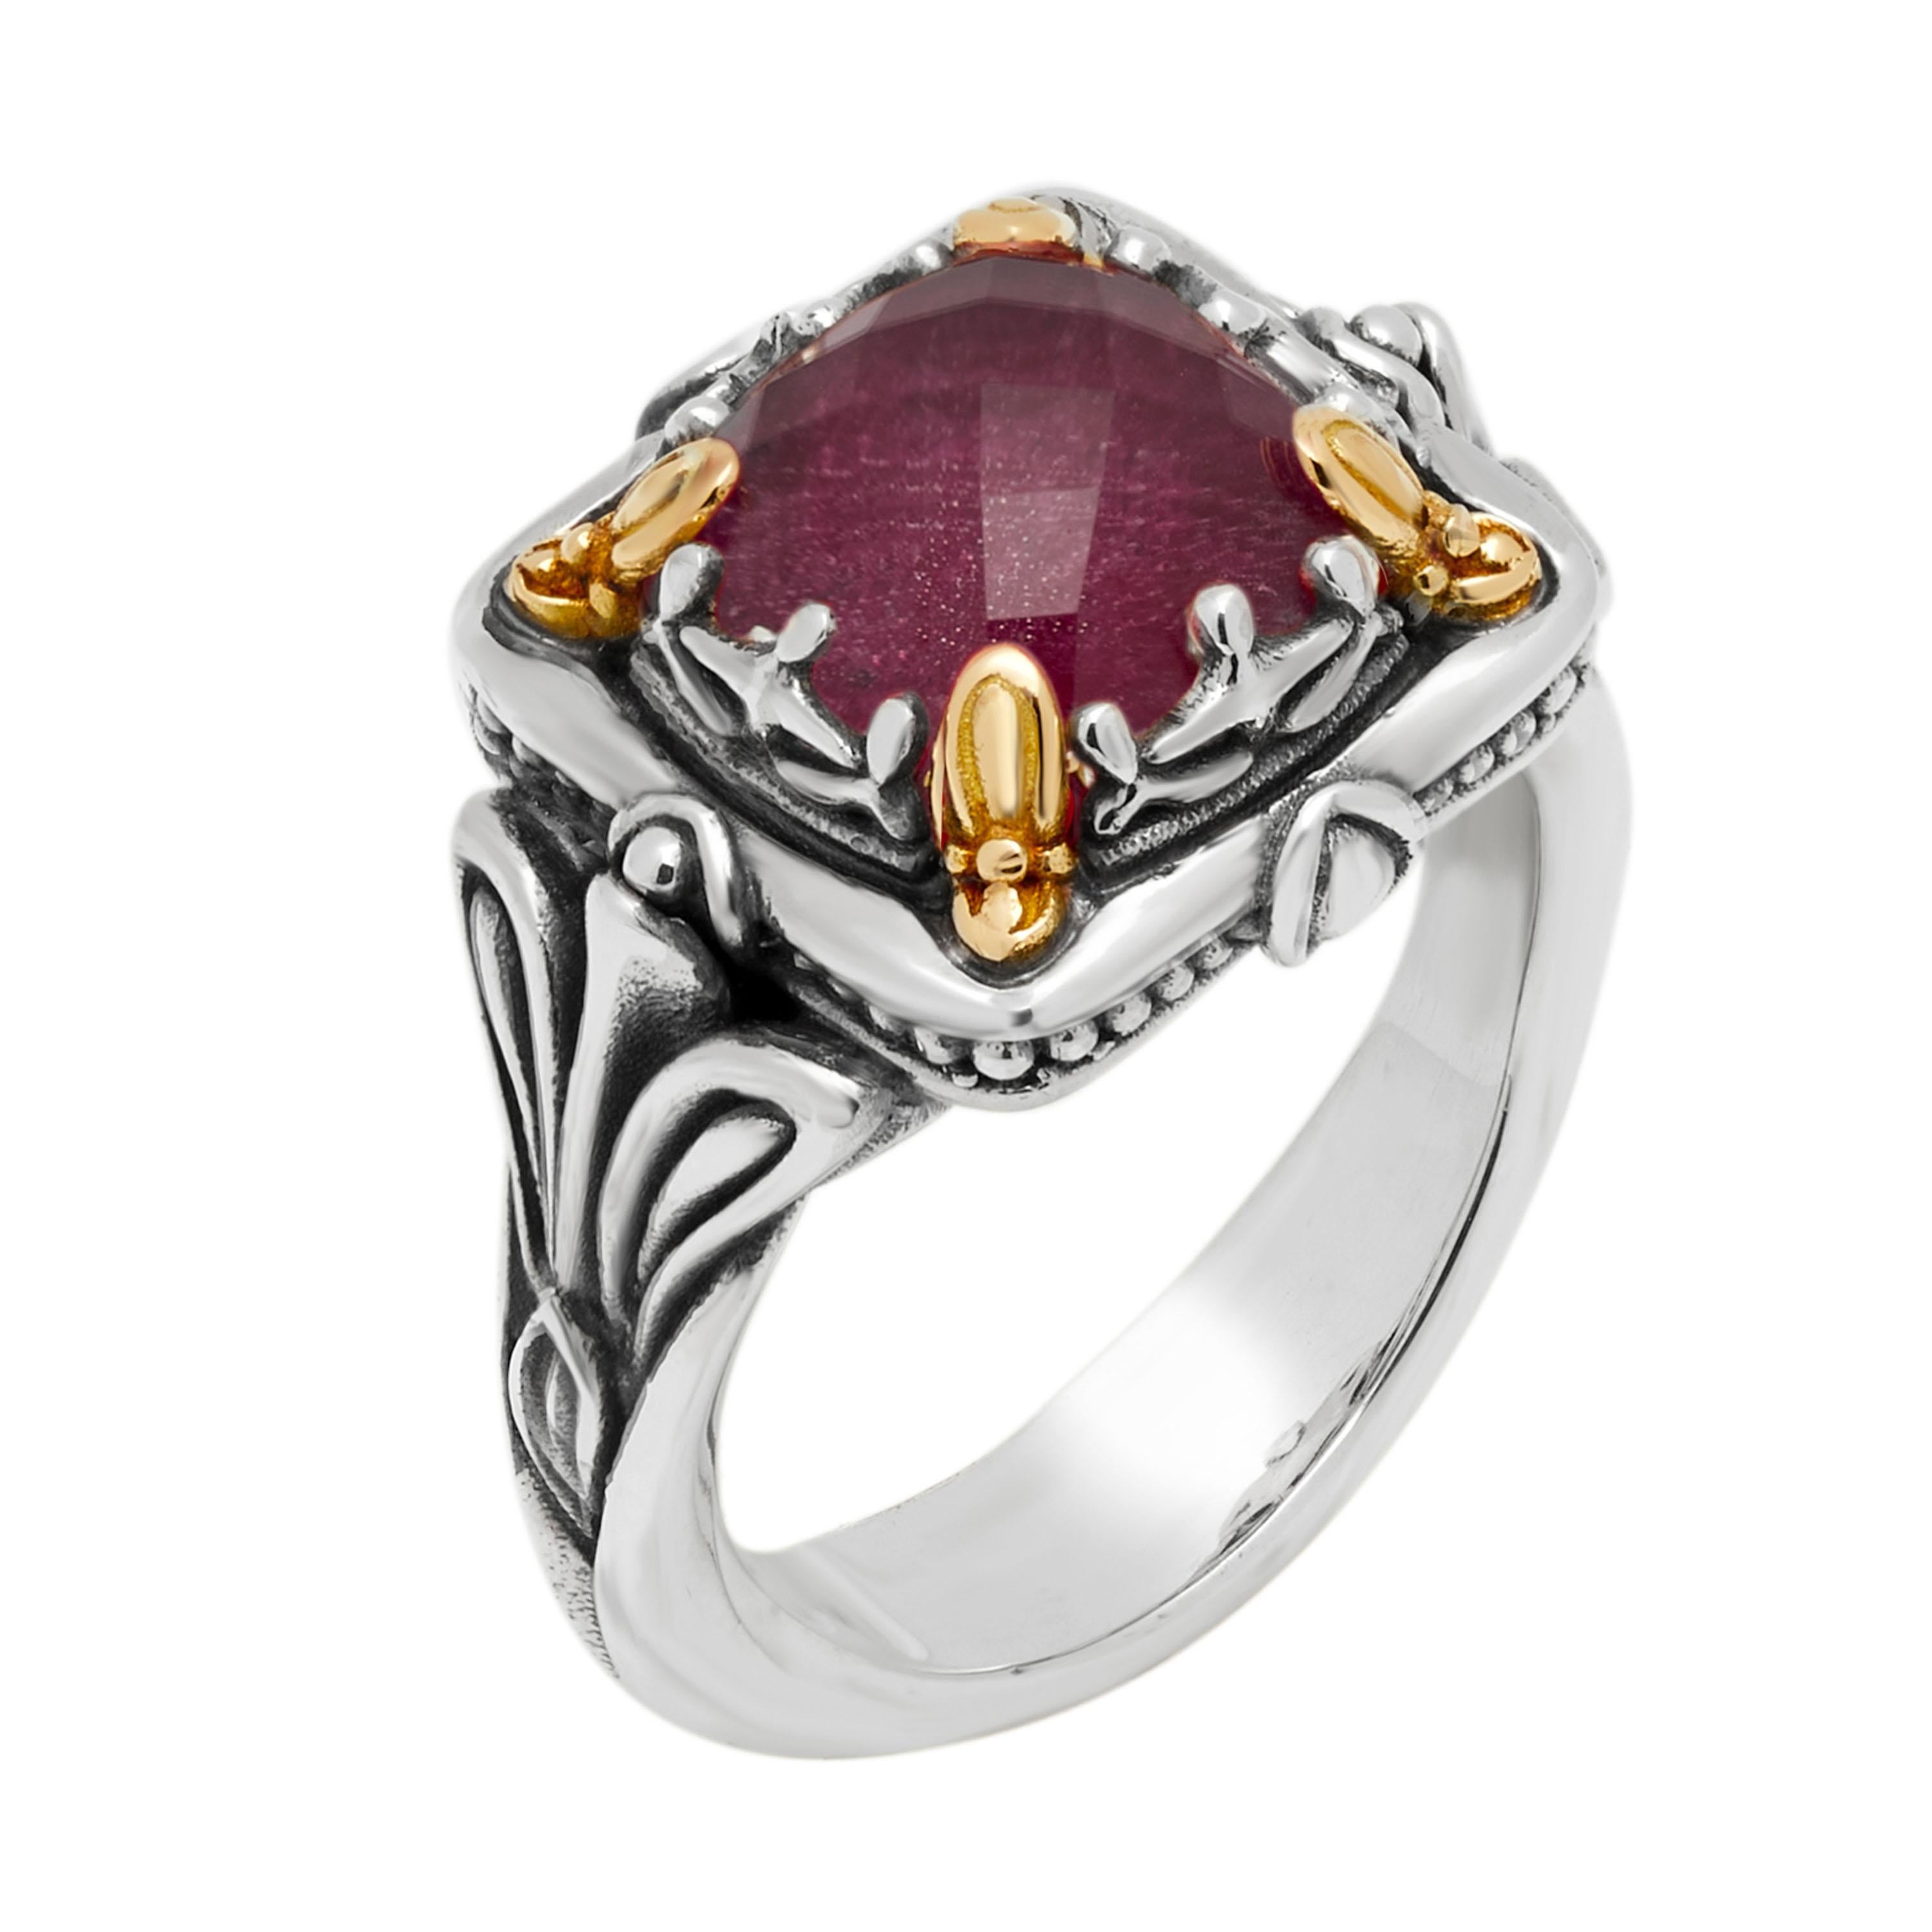 This captivating Konstantino sterling silver statement ring features a faceted ruby doublet held by 18K yellow gold prongs. The band width is 4.85mm. The ring size is 8 (57.0).
